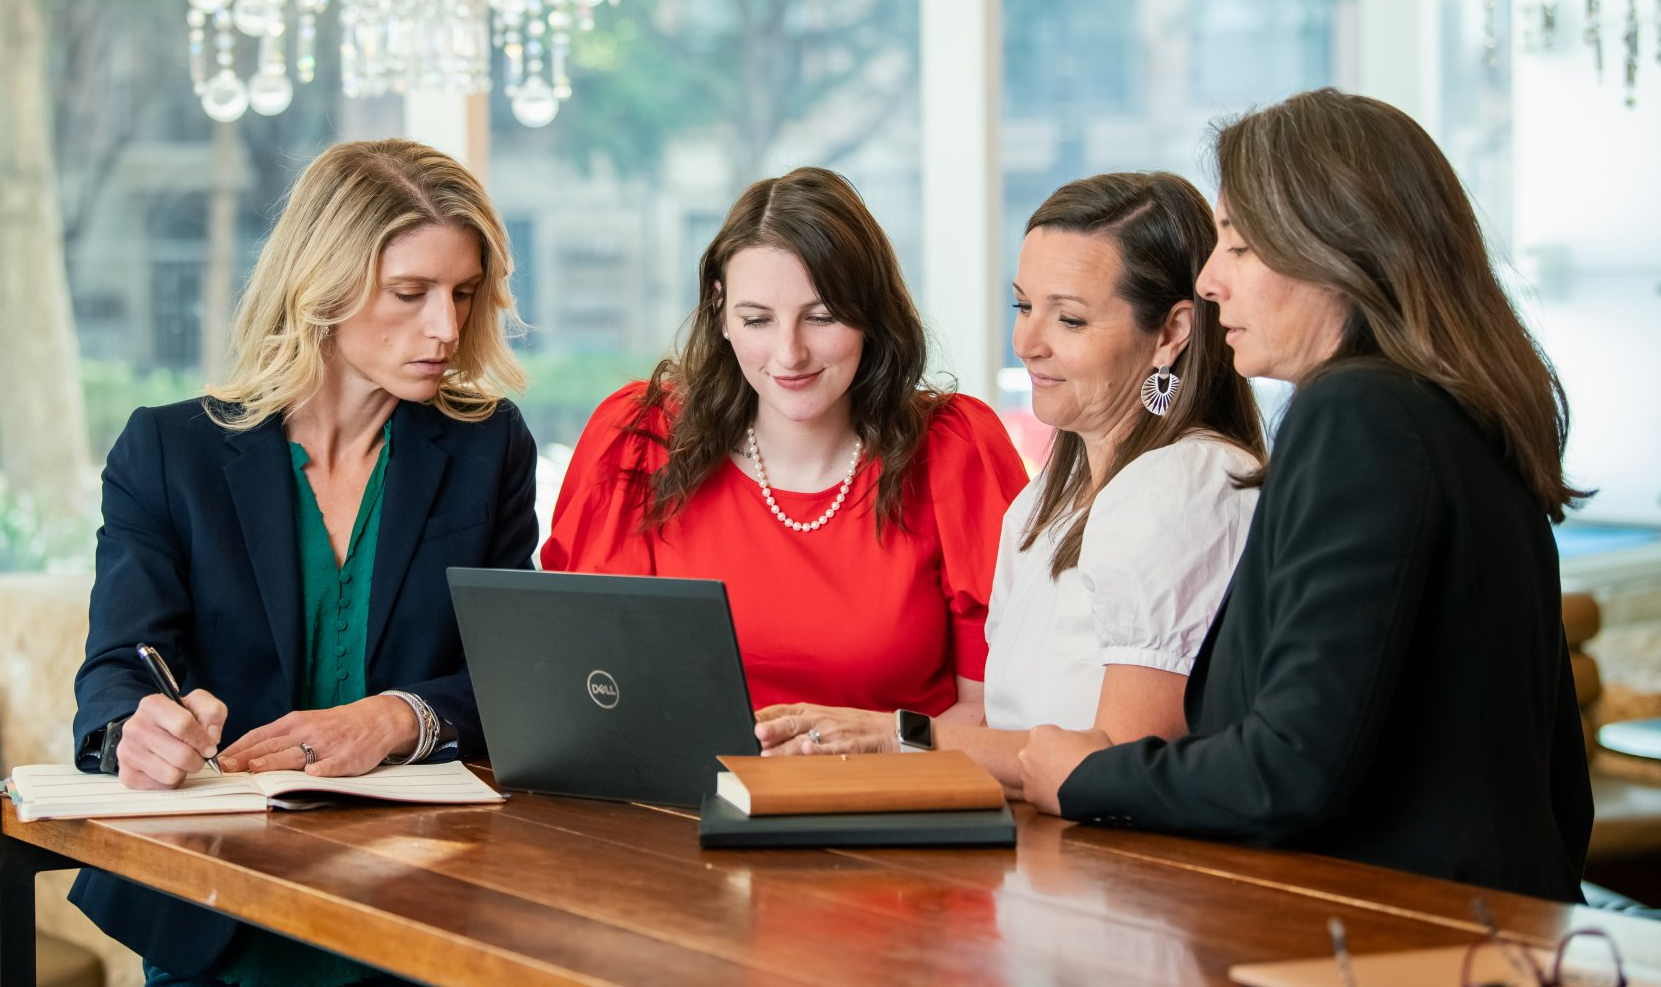 A group of women are sitting at a table looking at a laptop computer.